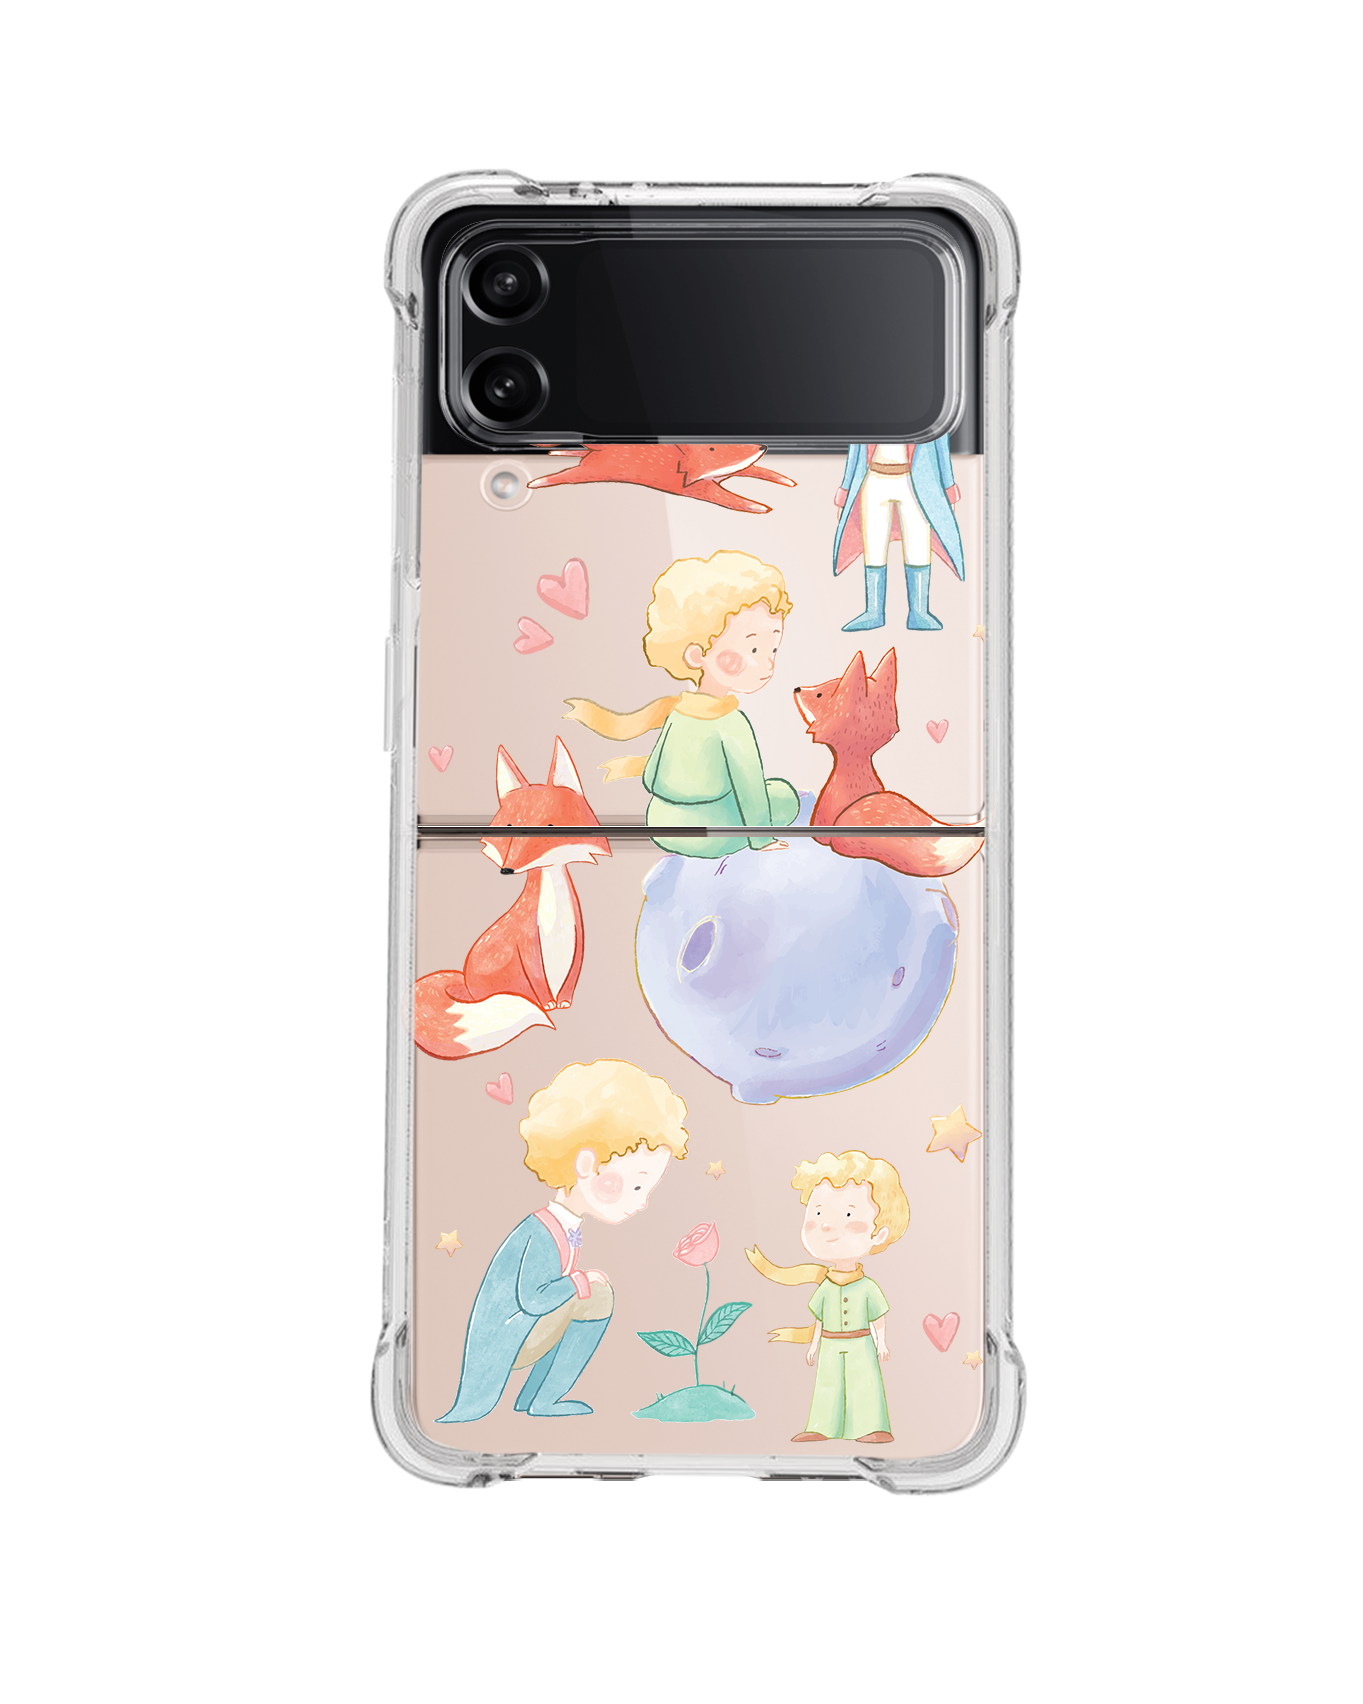 Android Flip / Fold Case - Little Prince & Fox